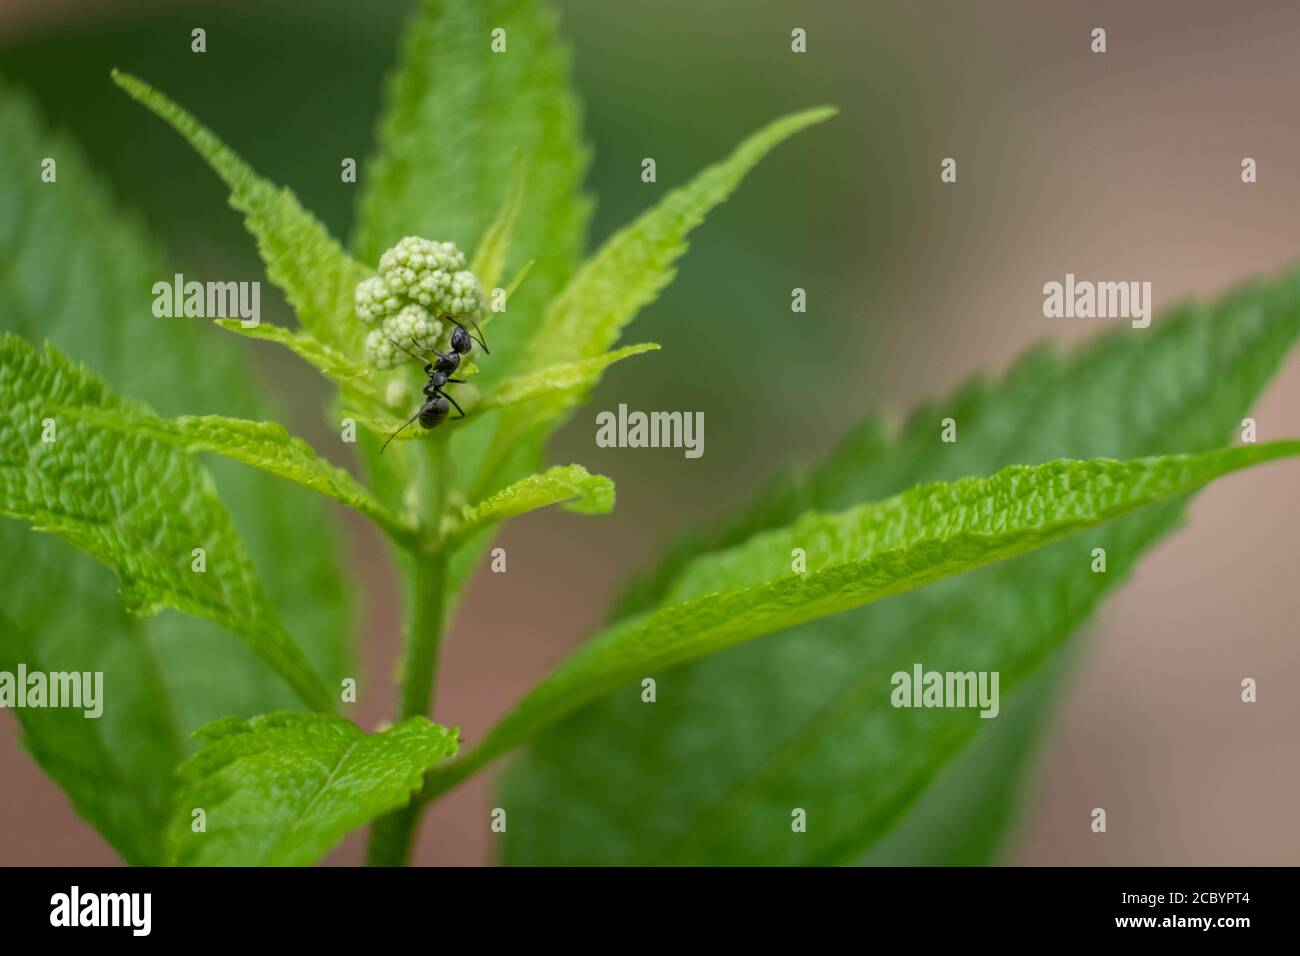 A species of formicine ant climbs upon a flower bud of a lush green plant. Stock Photo